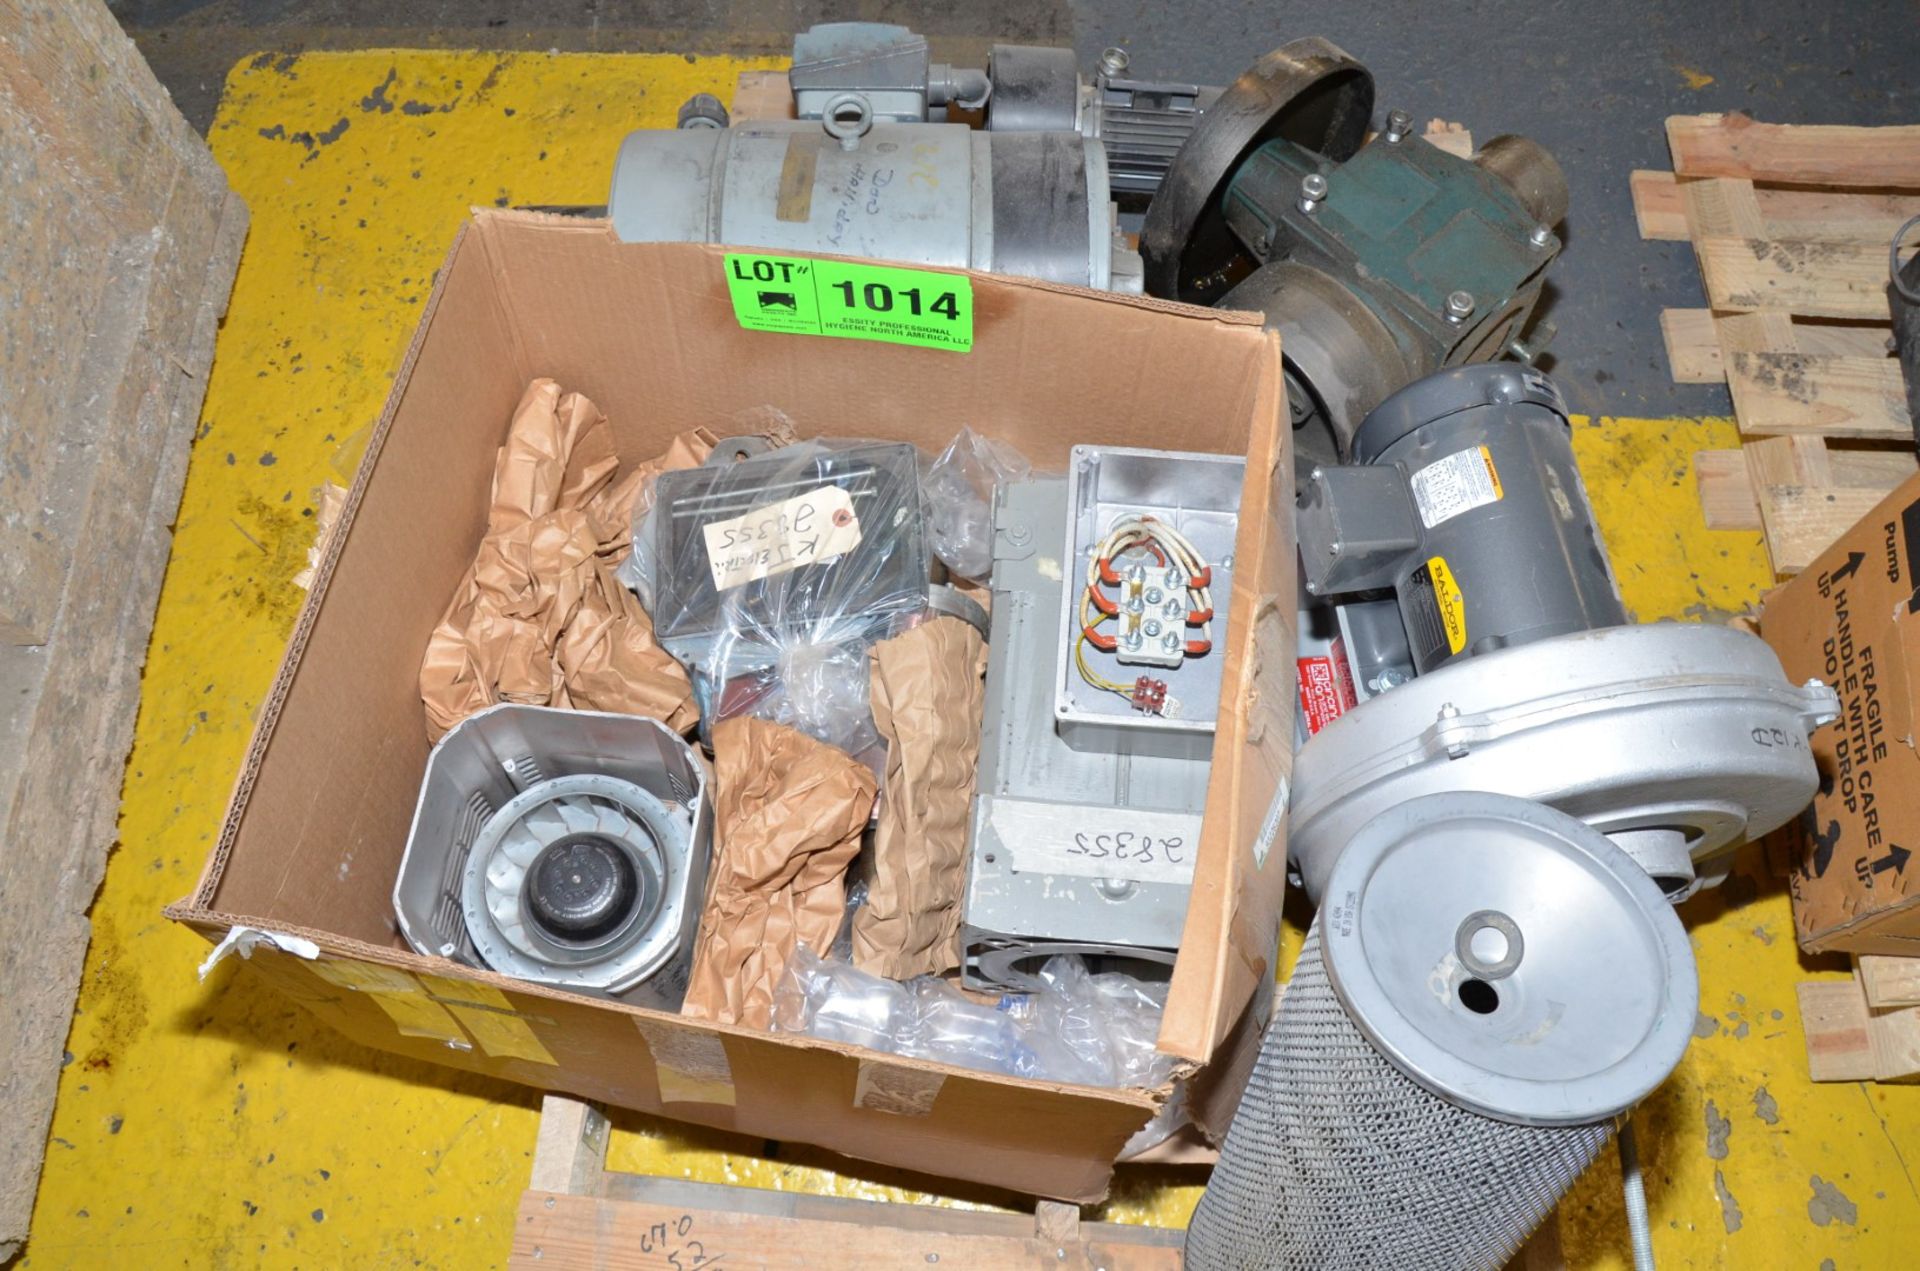 LOT/ MOTORS AND GEARBOXES [RIGGING FEE FOR LOT #1014 - $25 USD PLUS APPLICABLE TAXES]